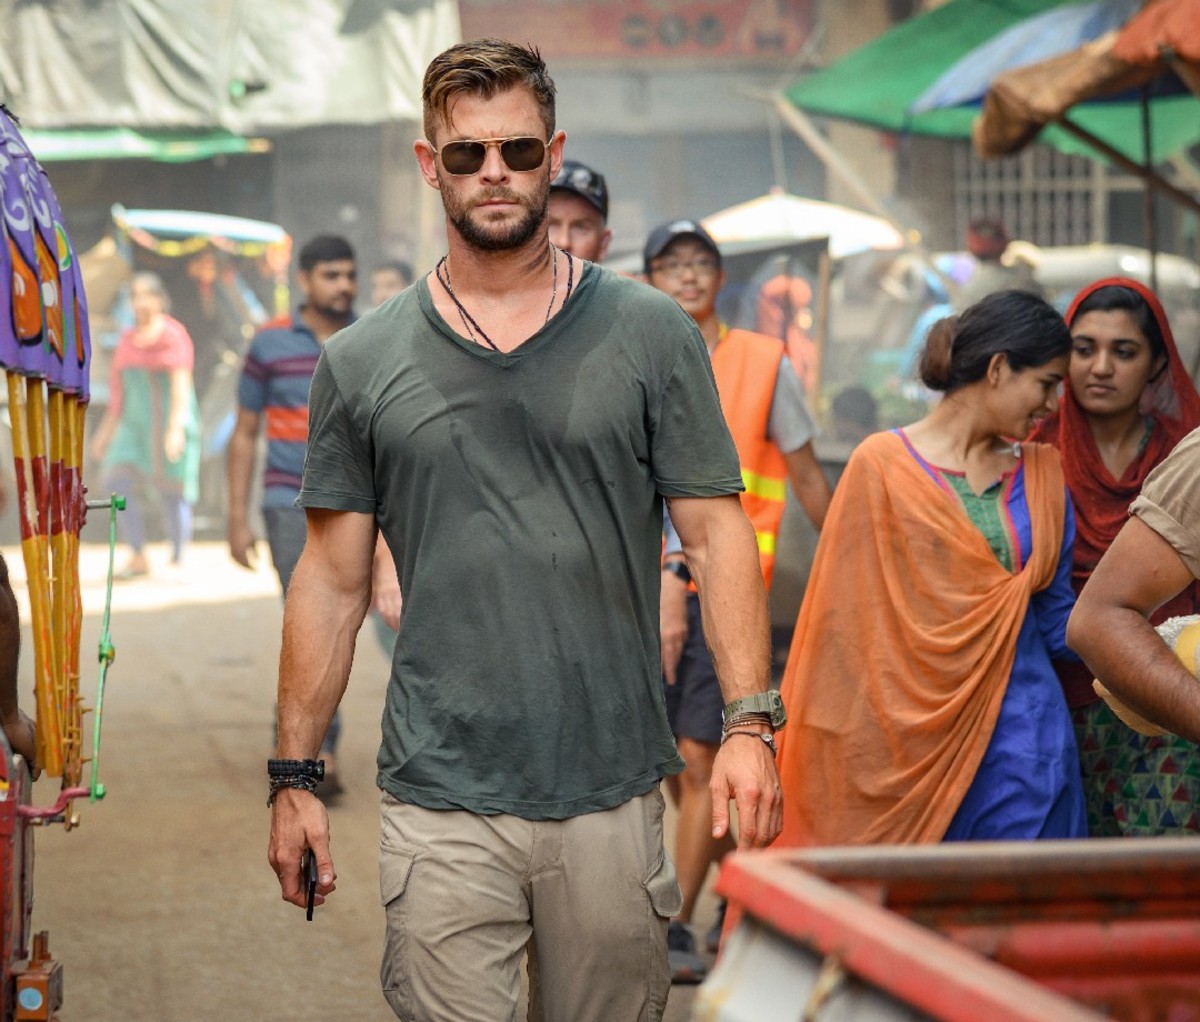 Chris Hemsworth in shades and aT0shirt walks through a market during a scene from Extraction.